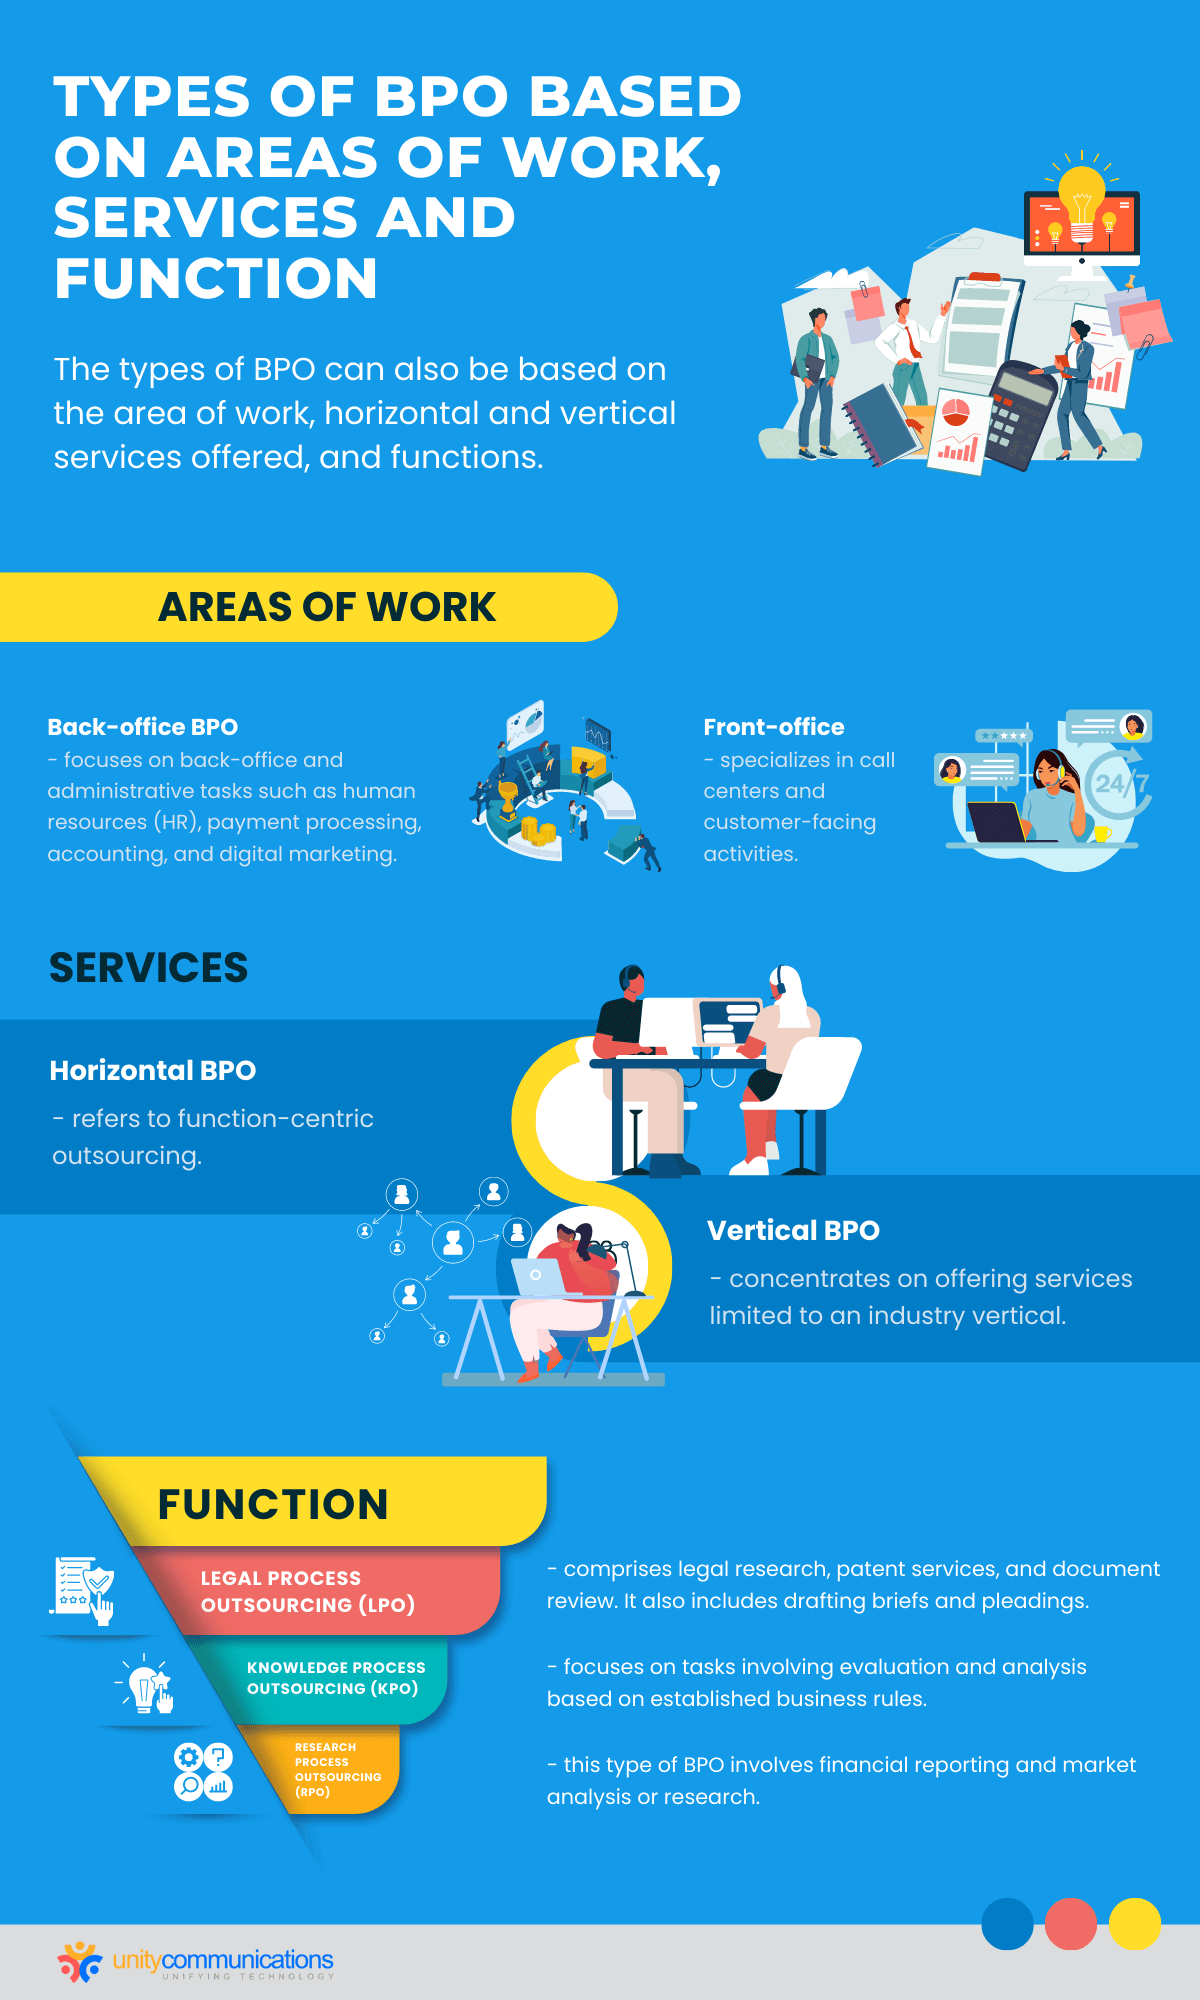 Types of BPO (business process outsourcing) - Infographic